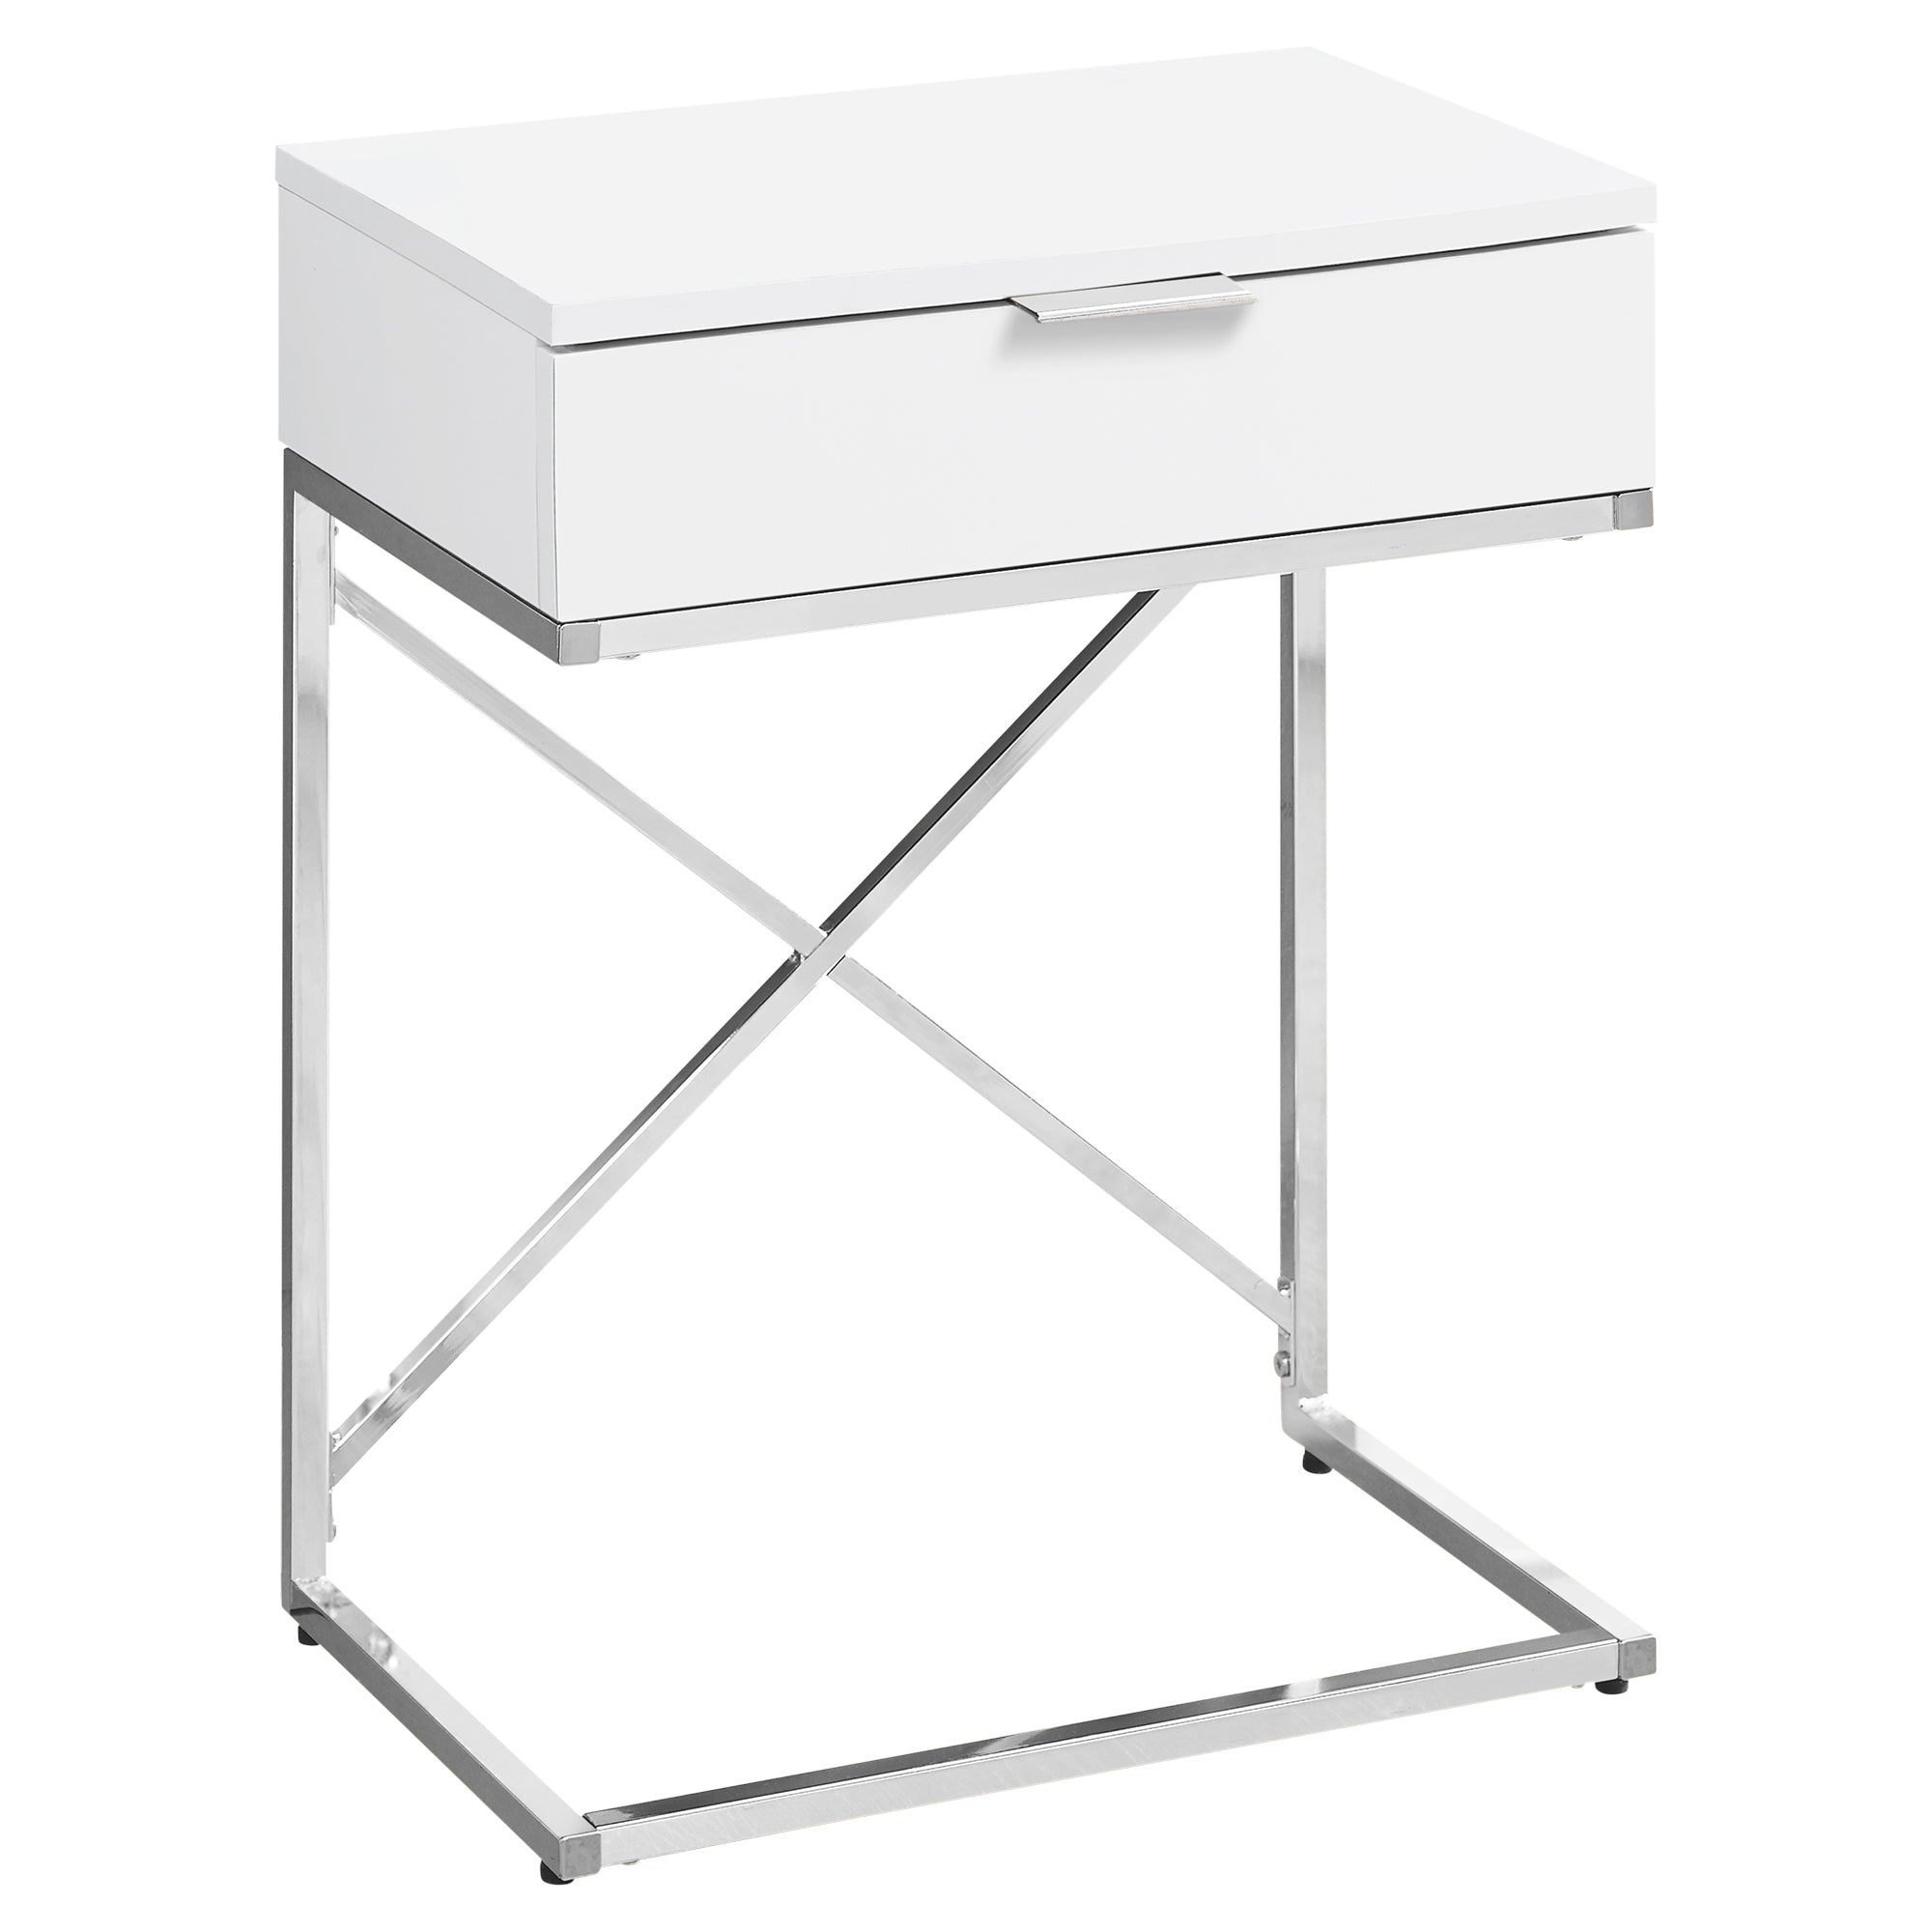 MN-803470    Accent Table, Side, End, Nightstand, Lamp, Living Room, Bedroom, Metal Legs, Laminate, Glossy White, Chrome, Contemporary, Modern